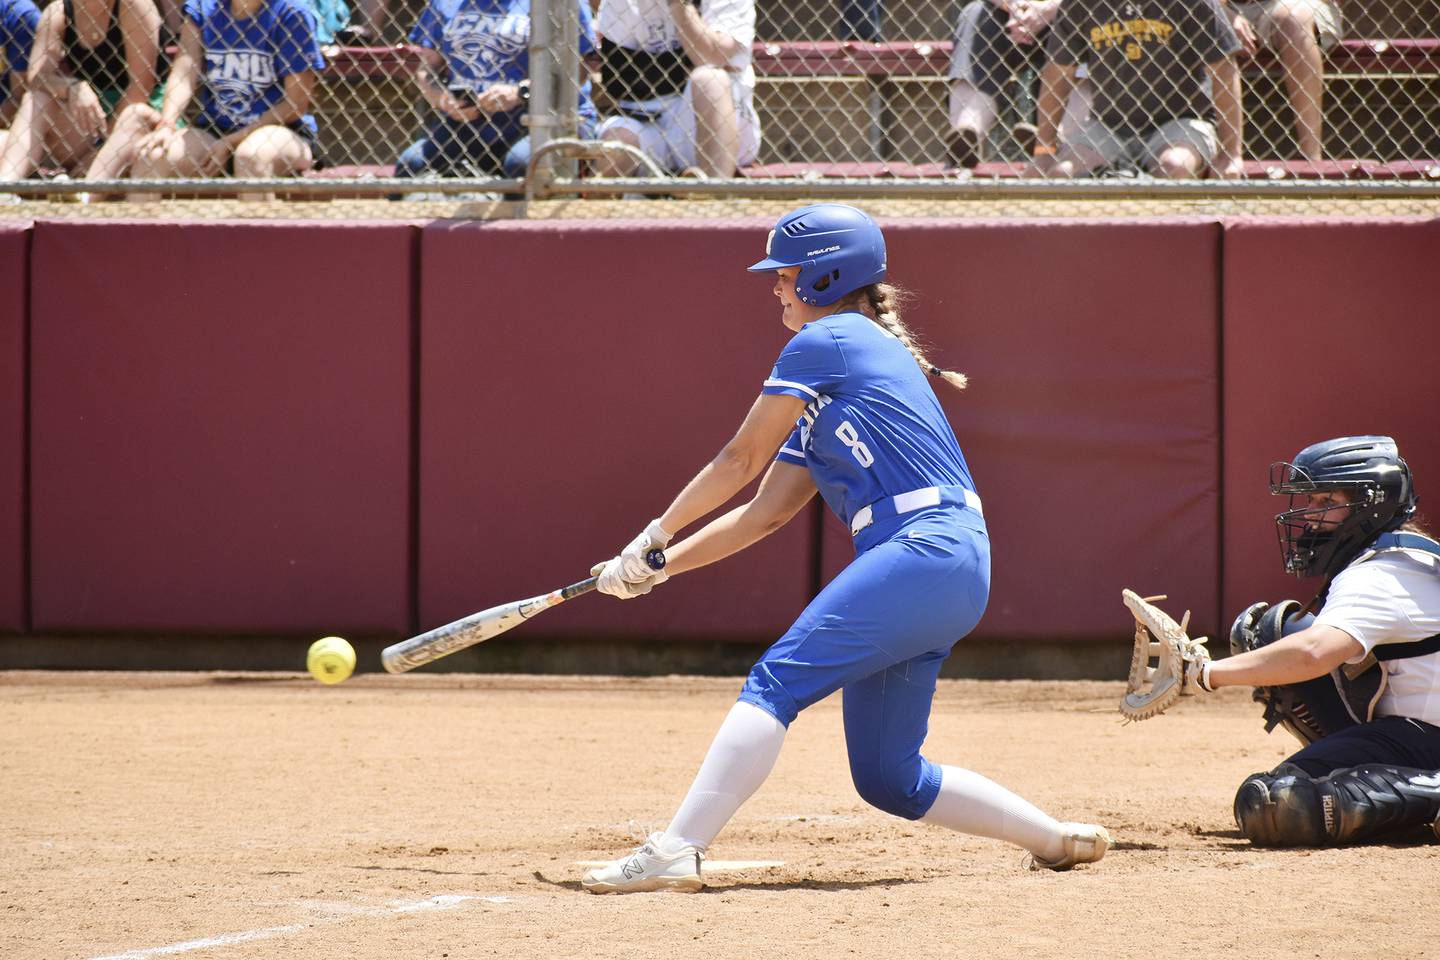 Millikin's Gretchen Gould hits the ball during the NCAA Division III World Series last month in Salem, Virginia. Gould, a Sterling native, helped the Big Blue advance to the D-III championships for the first time in program history.